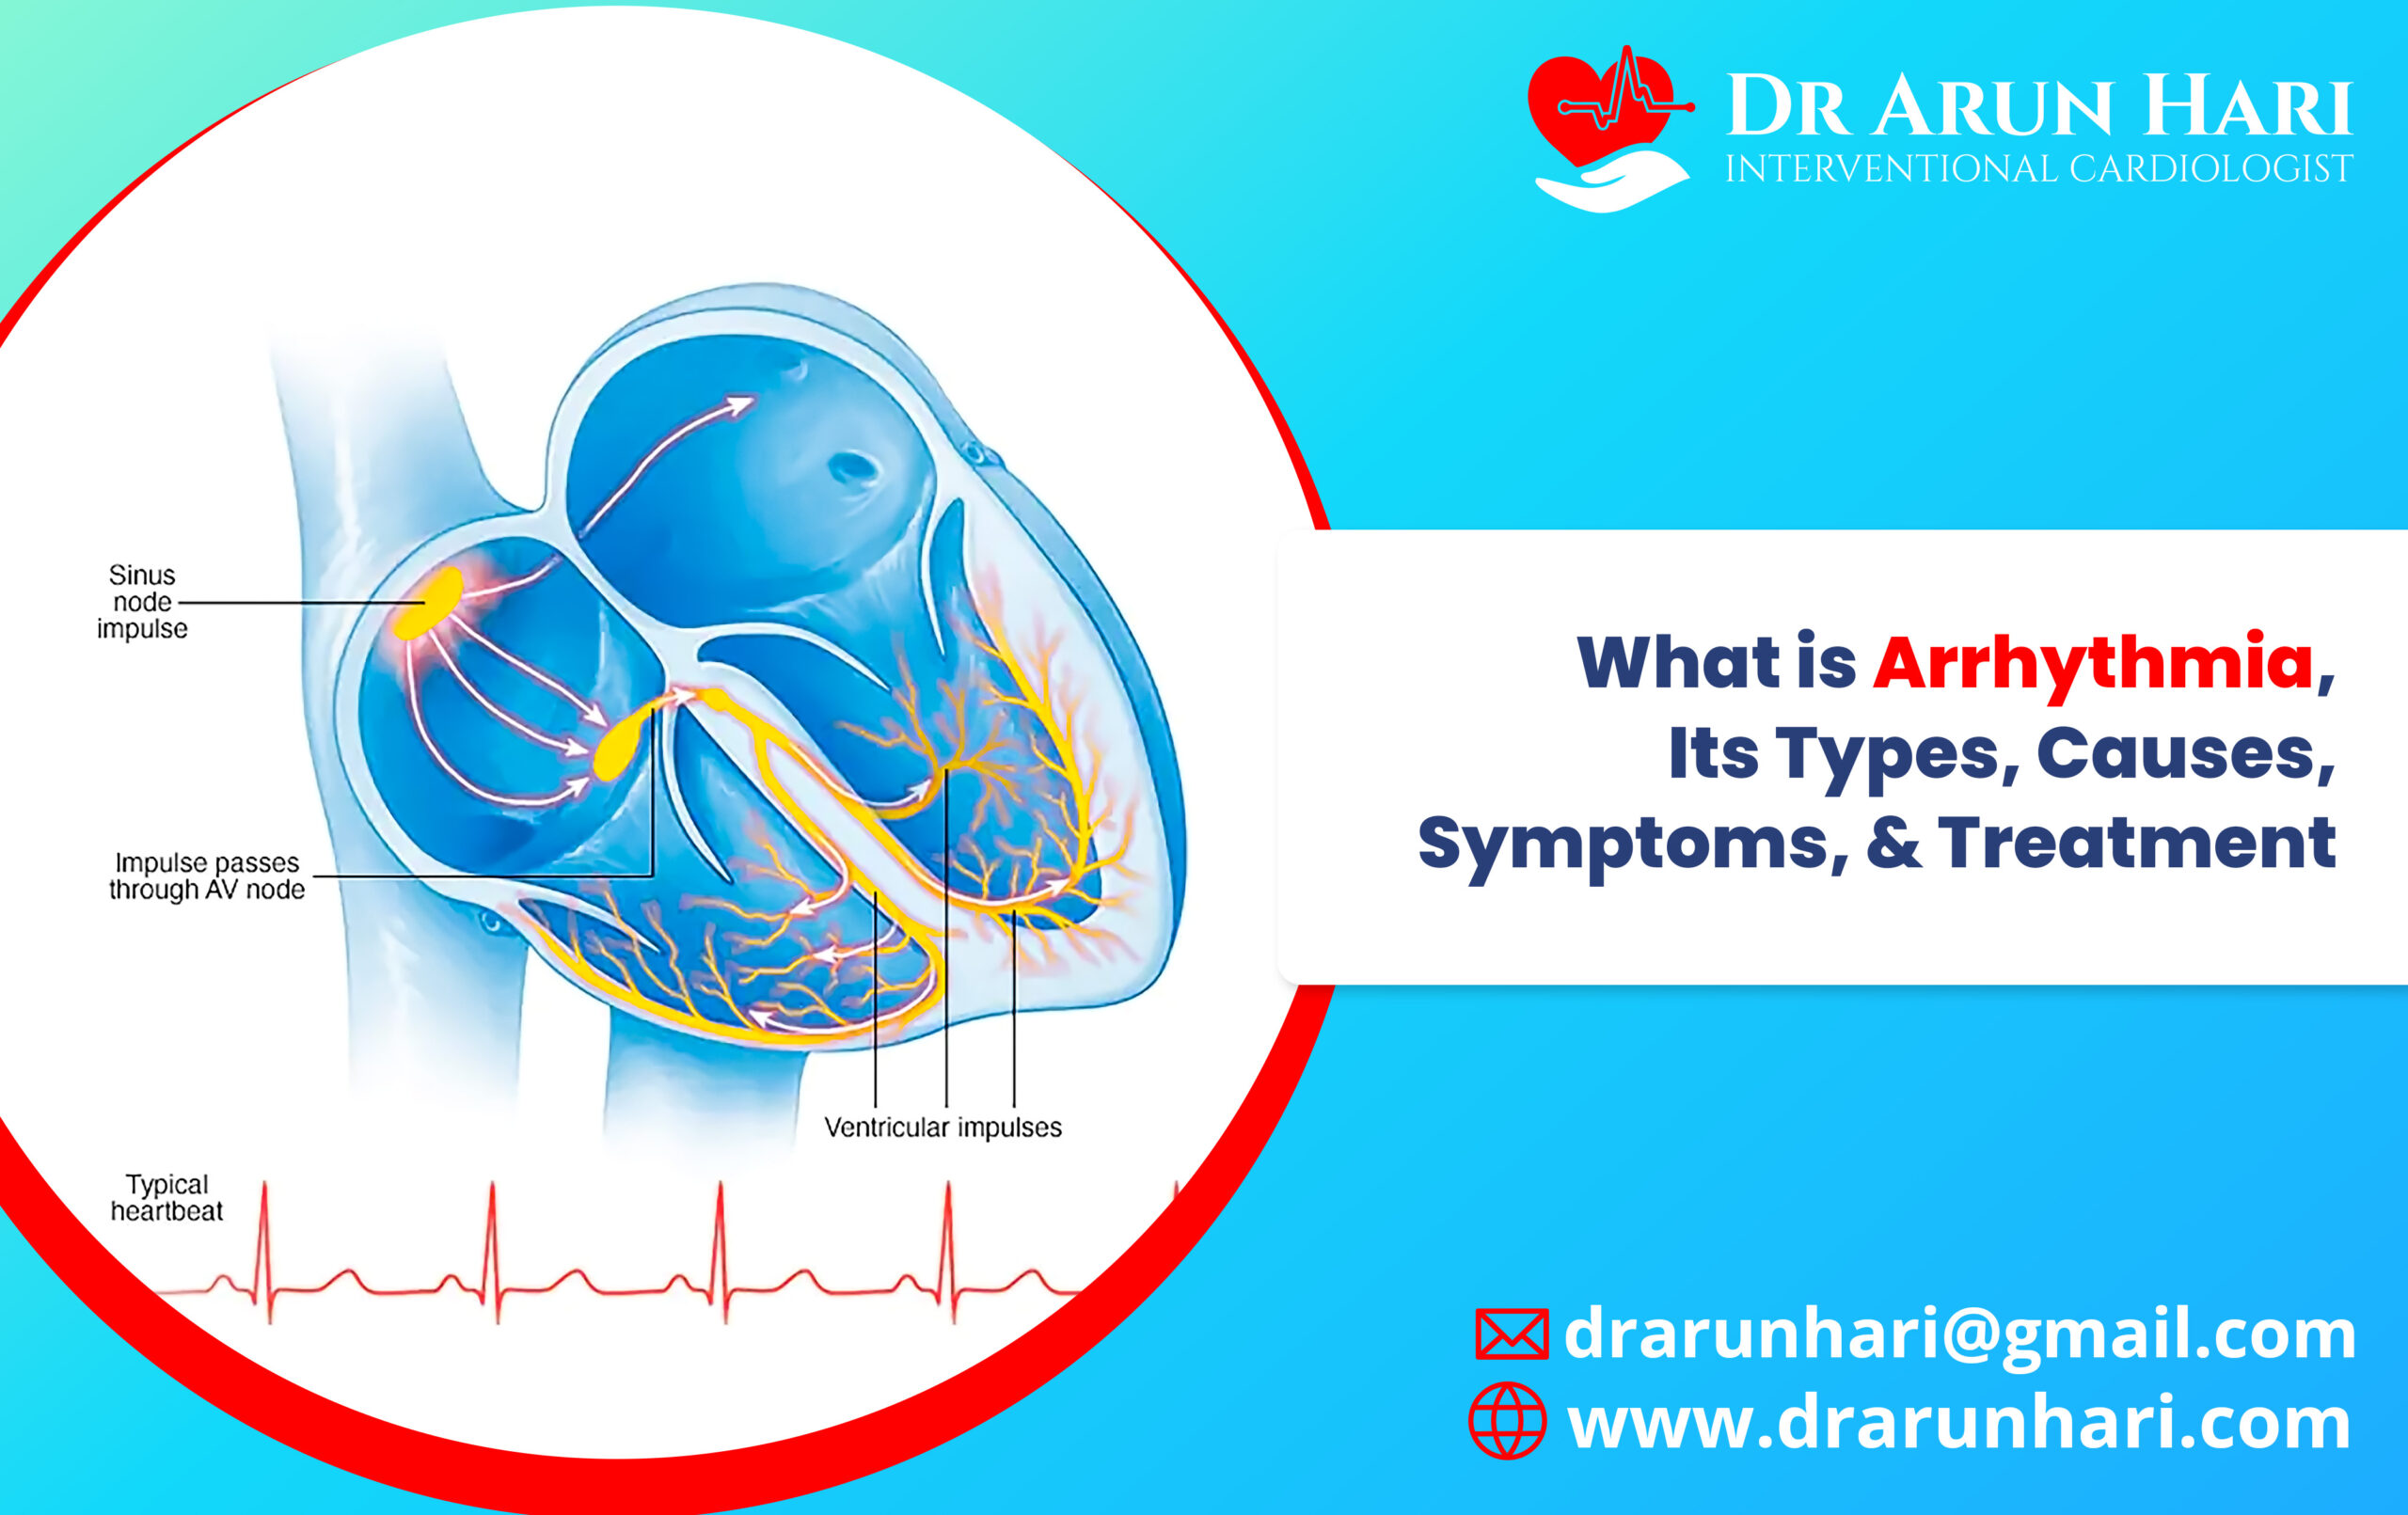 You are currently viewing Arrhythmia, Its Types, Causes, Symptoms, & Treatment